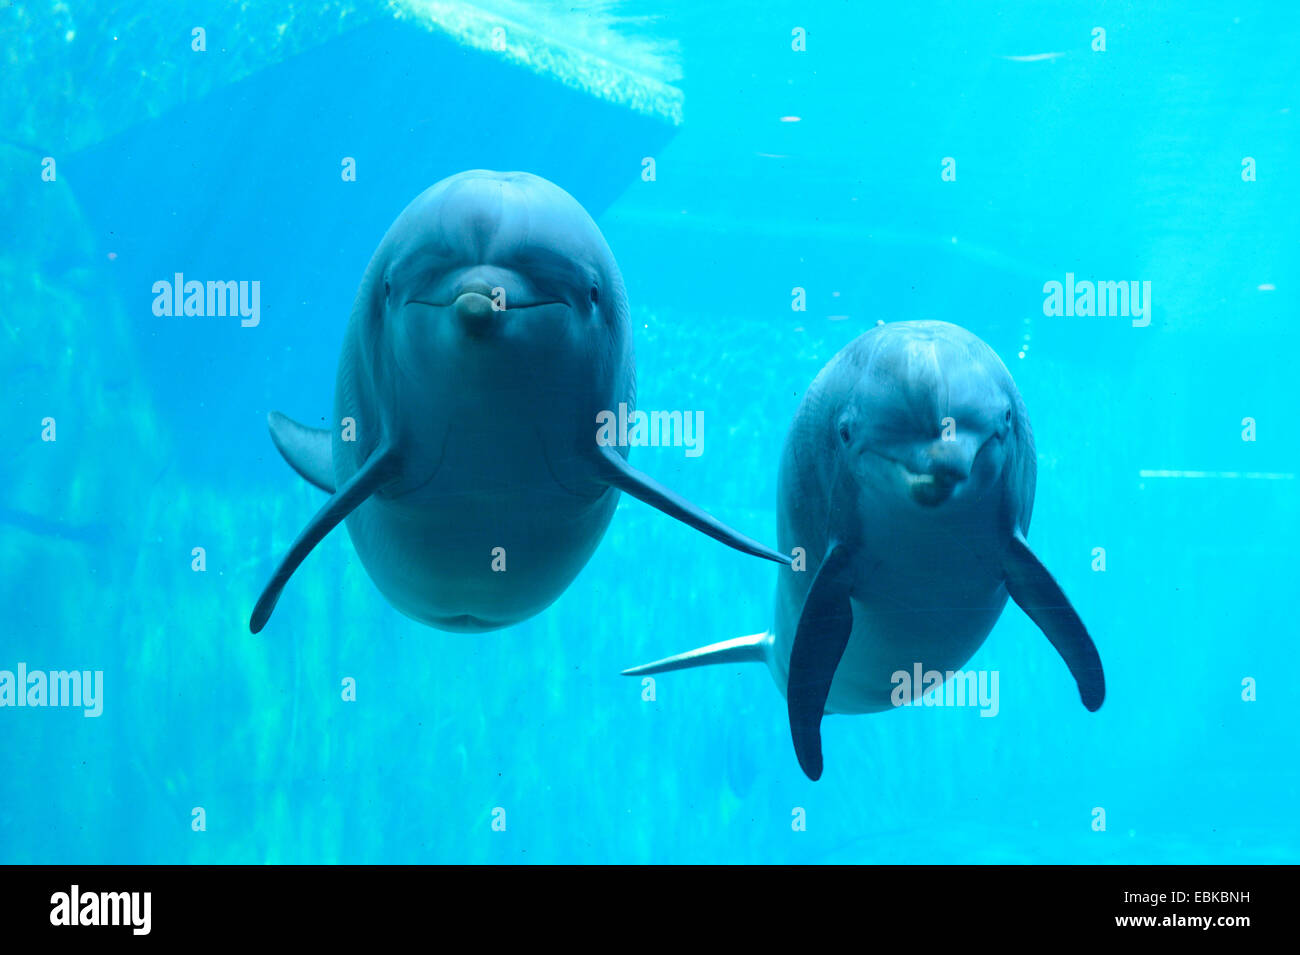 Bottlenosed dolphin, Common bottle-nosed dolphin (Tursiops truncatus), two dolphins swimming in dolphinarium Stock Photo